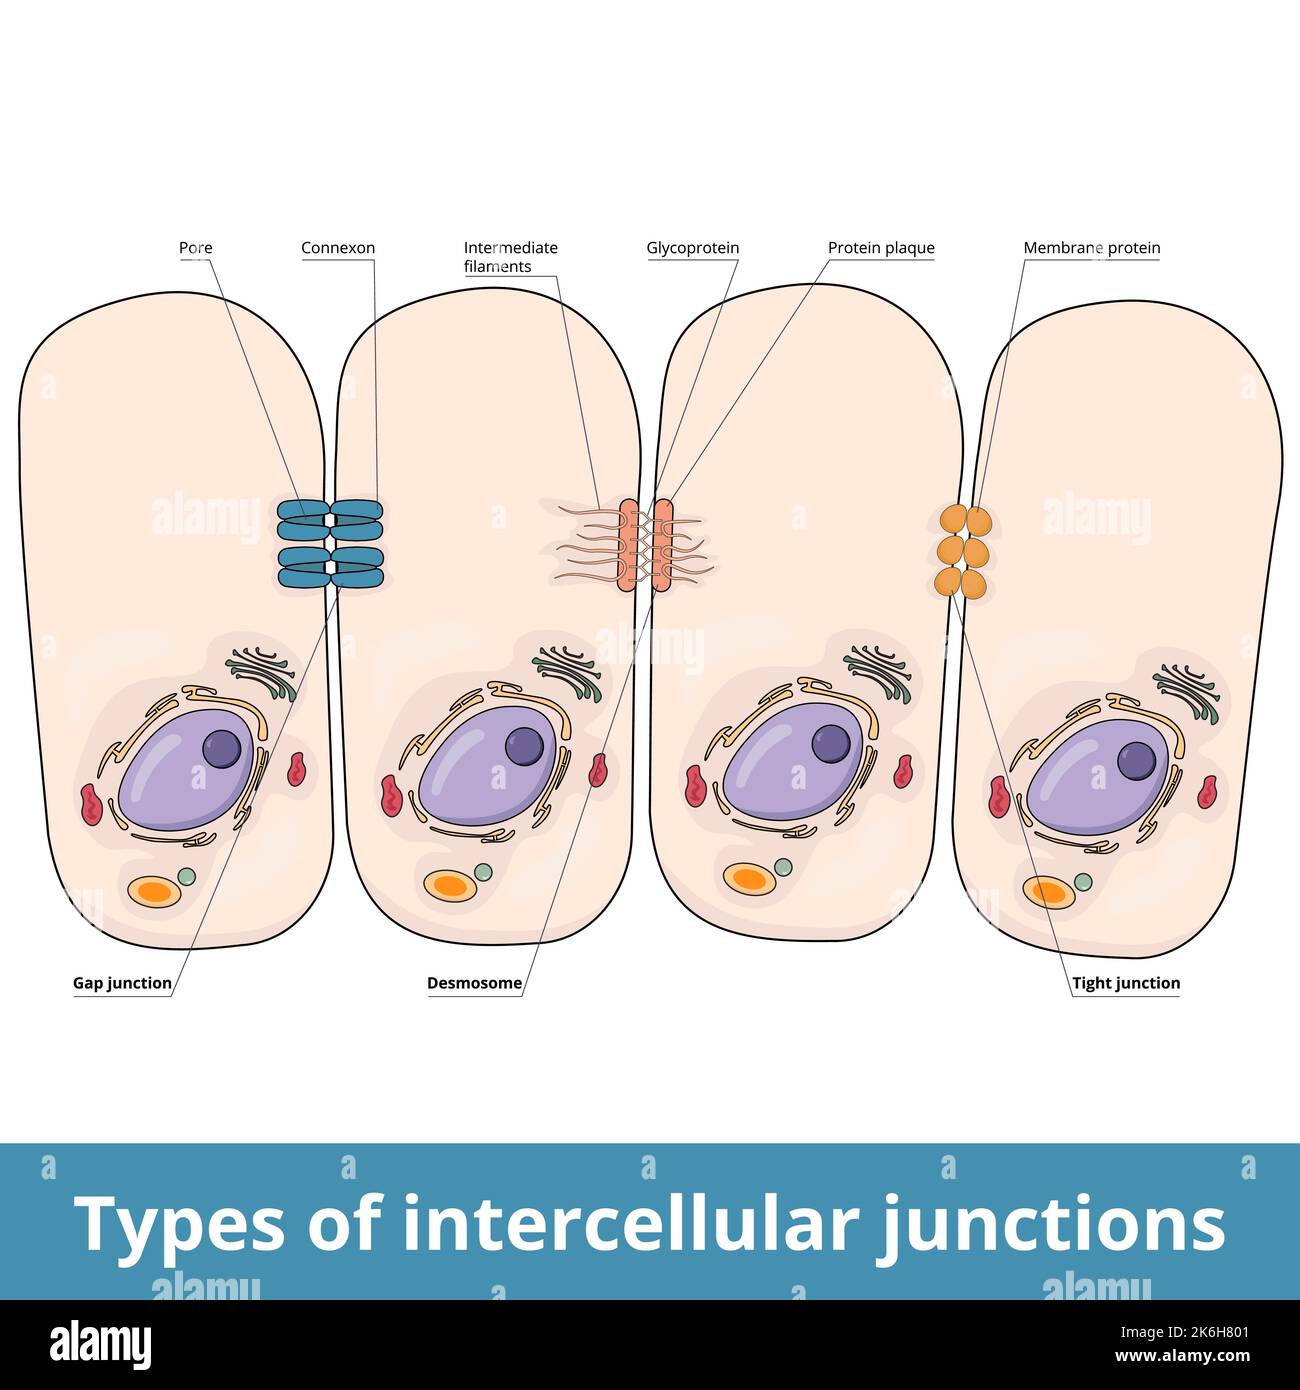 Types of intercellular junctions. Gap junction (pore and connexon), desmosome (filaments, glycoprotein, plaque) and tight junction. Stock Vector